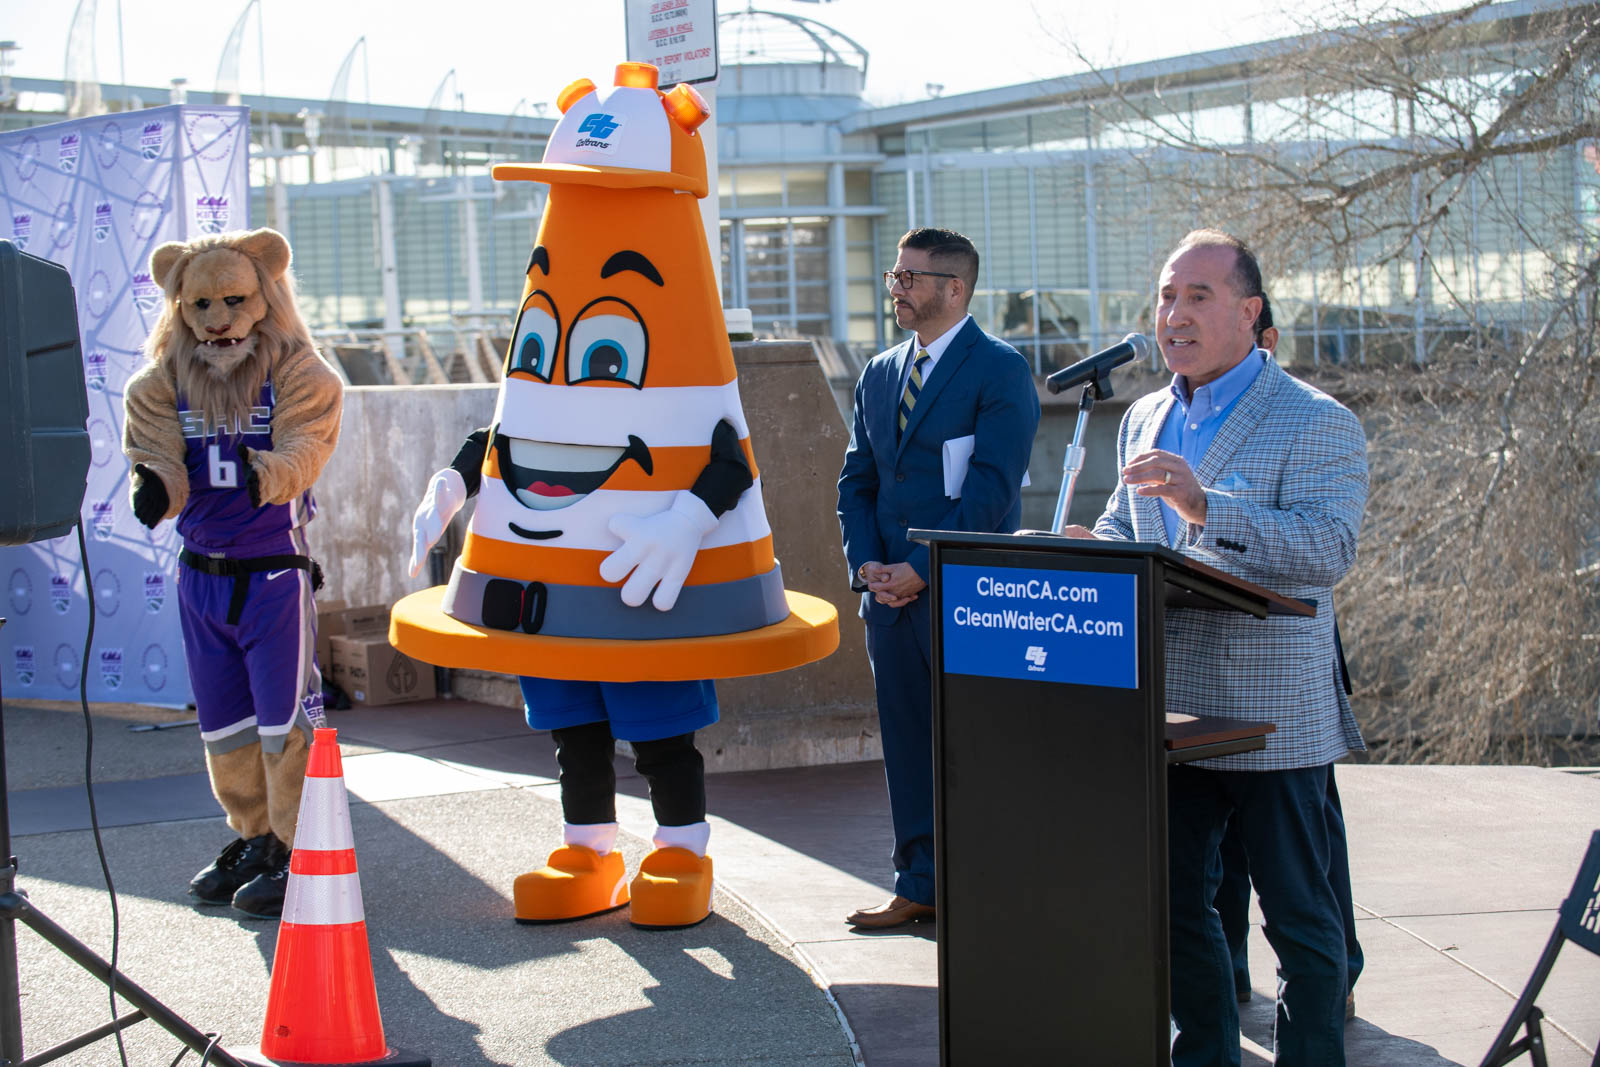 Caltrans Director Tony Tavares addressed the crowd at the Clean California Sacramento River Clean Up event from behind a dark brown wooden podium. The blue sign on the podium reads “CleanCA.com” and “CleanWaterCA.com” with the Caltrans logo below, in white. Standing to the Director’s right: Sampson the lion mascot, wearing a purple NBA Sacramento Kings team uniform with the number 6; Safety Sam, Caltrans’ orange cone mascot wearing a hardhat; Loren Magaña, Caltrans’ Stormwater campaign manager; and obscured by the Director, Sacramento Vice Mayor Eric Guerra.